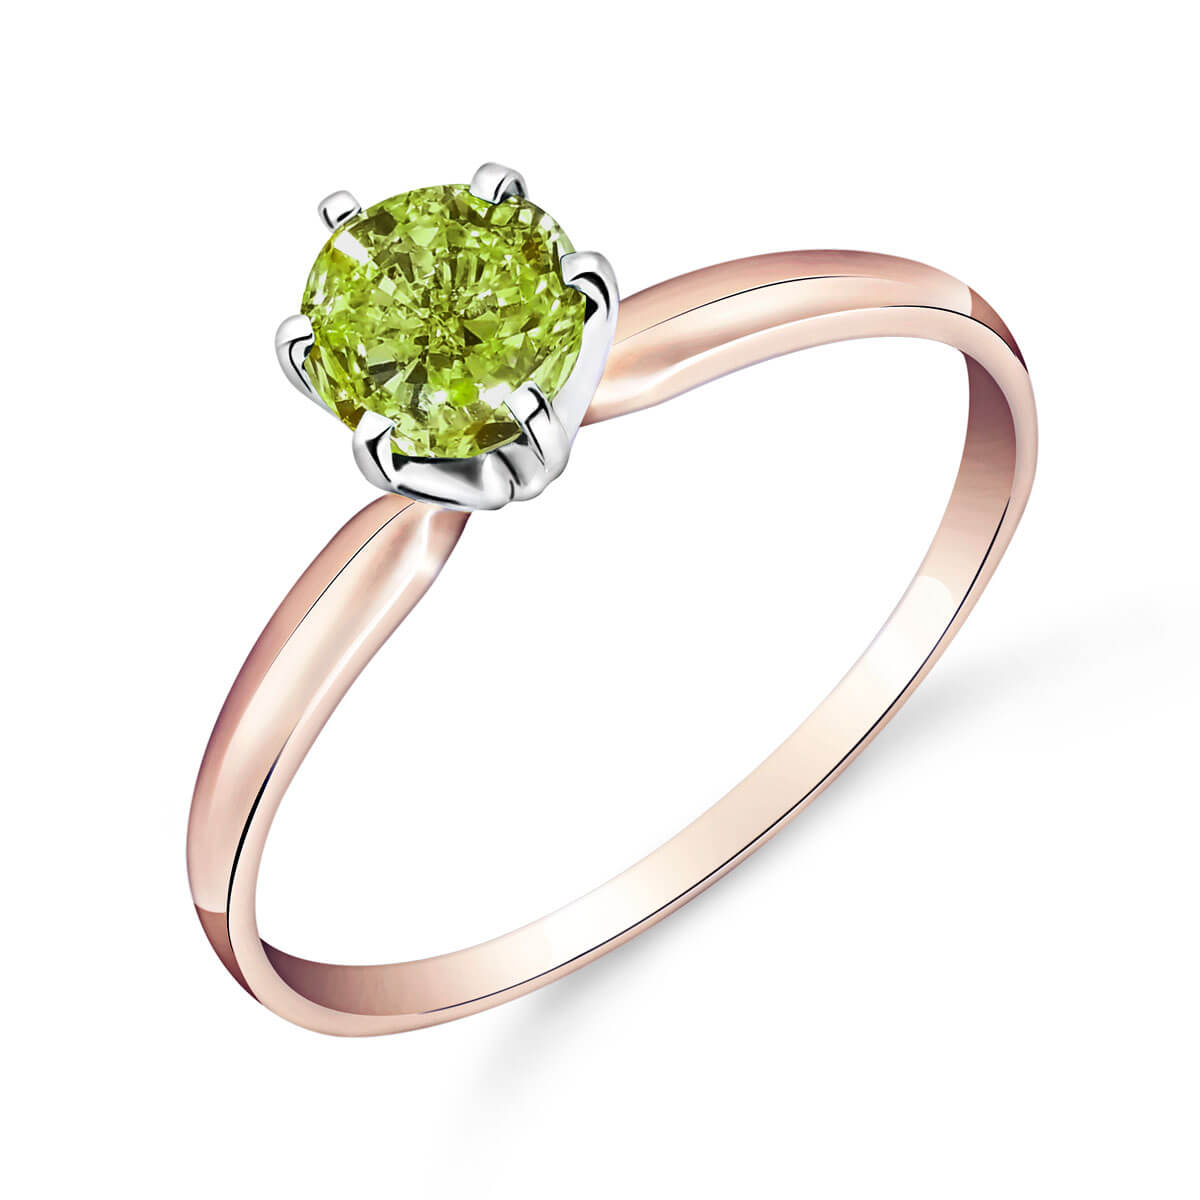 Green Diamond Crown Solitaire Ring 0.5 ct in 18ct Rose Gold